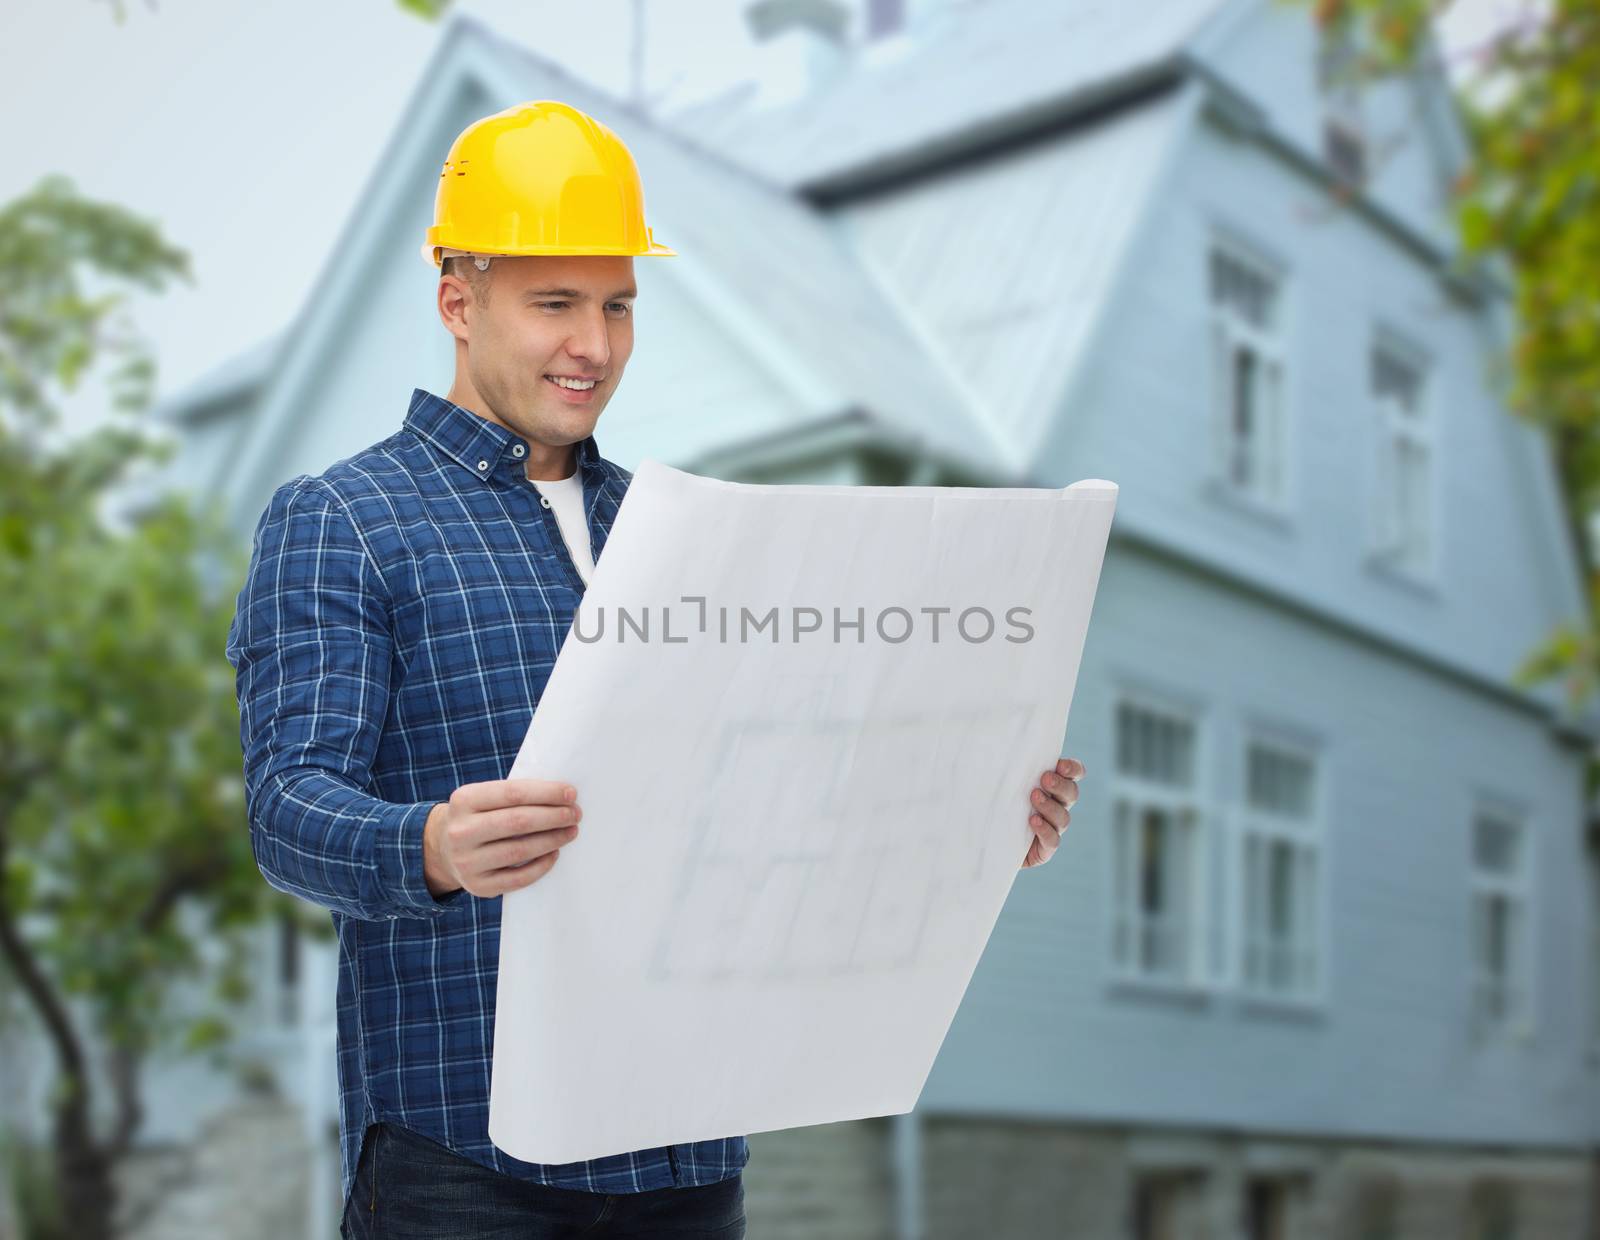 repair, construction, building, people and maintenance concept - smiling male builder or manual worker in helmet with blueprint over living house background